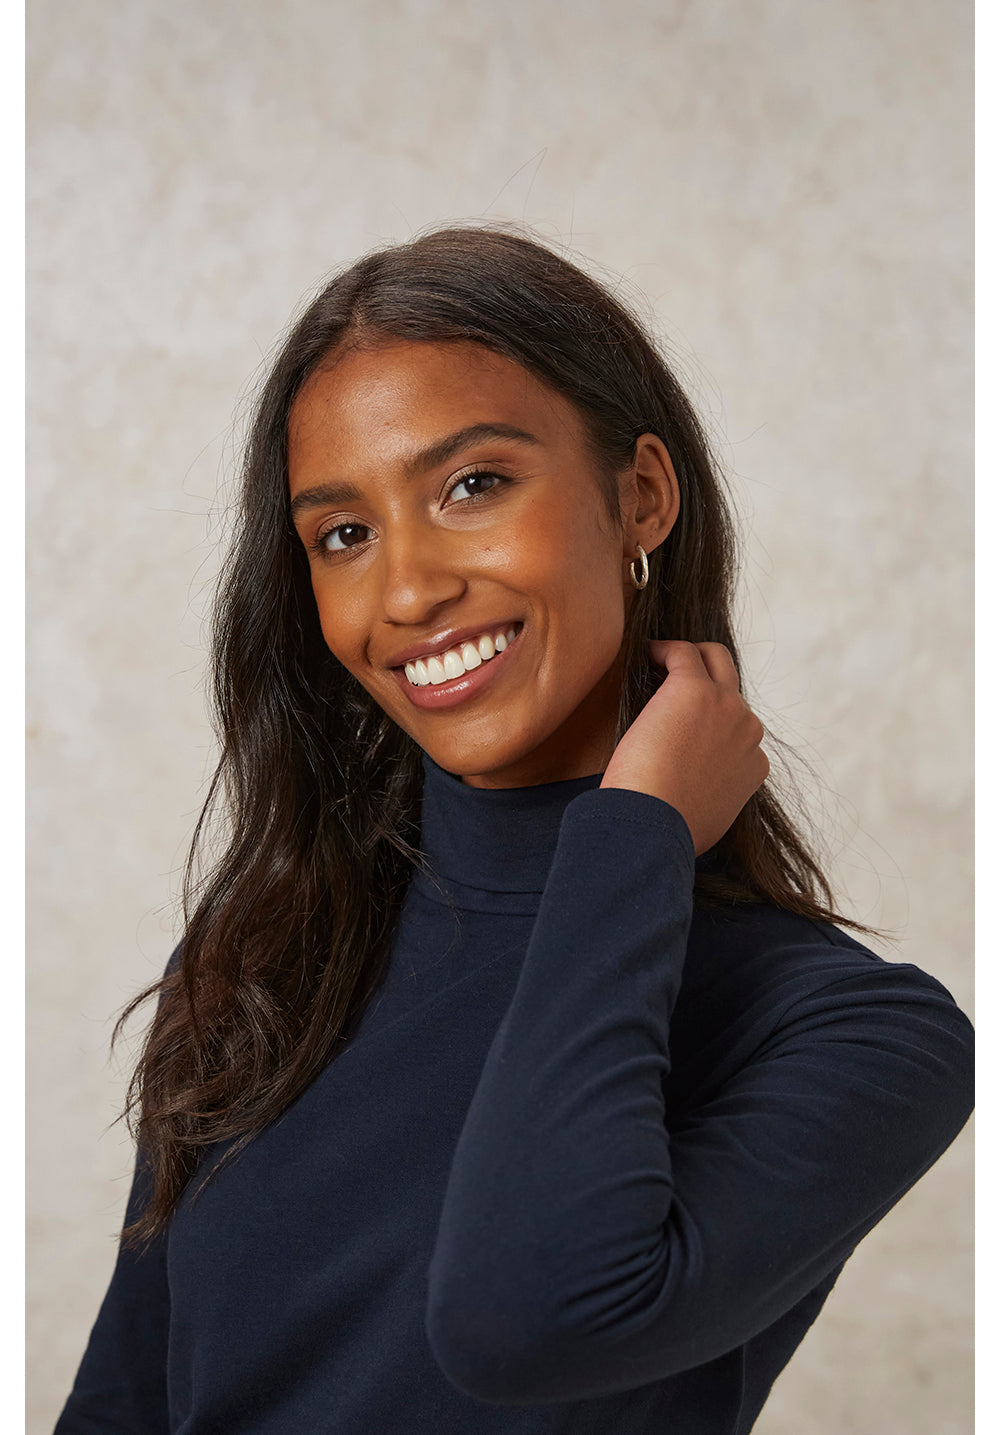 Laila Roll Neck Top in Navy